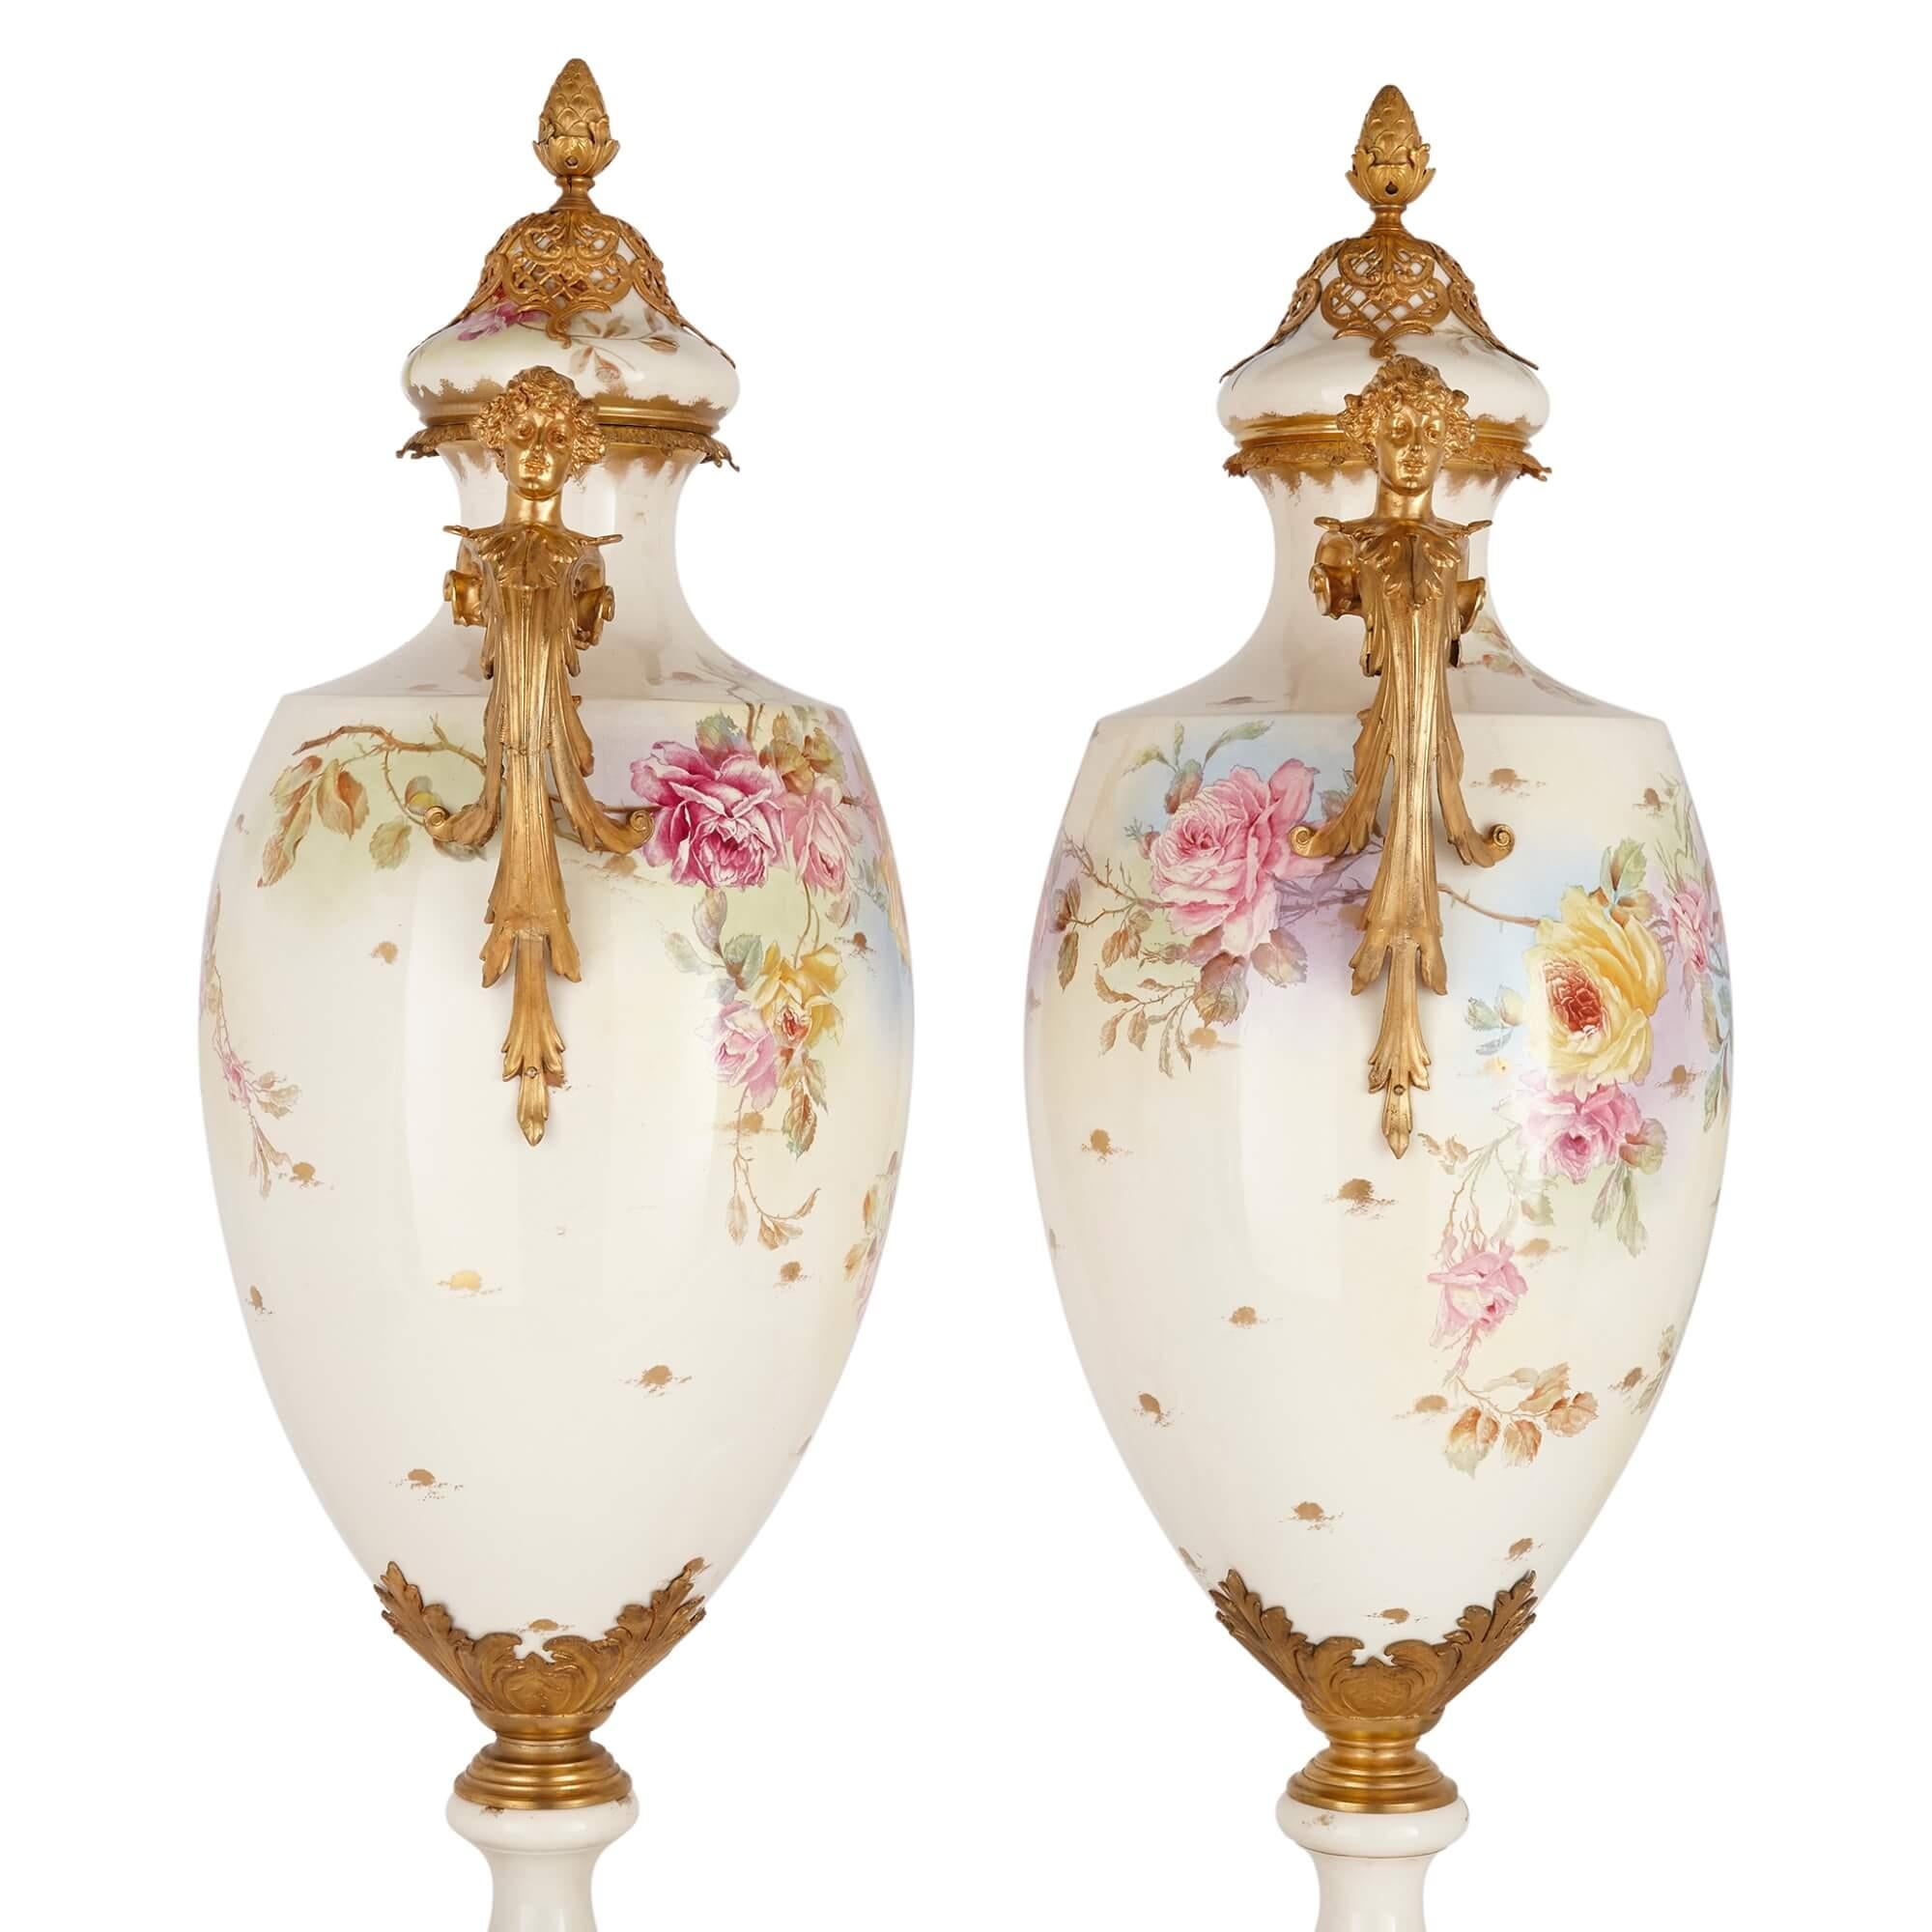 Rococo Pair of Large Sèvres-style Porcelain and Gilt-Metal Vases For Sale